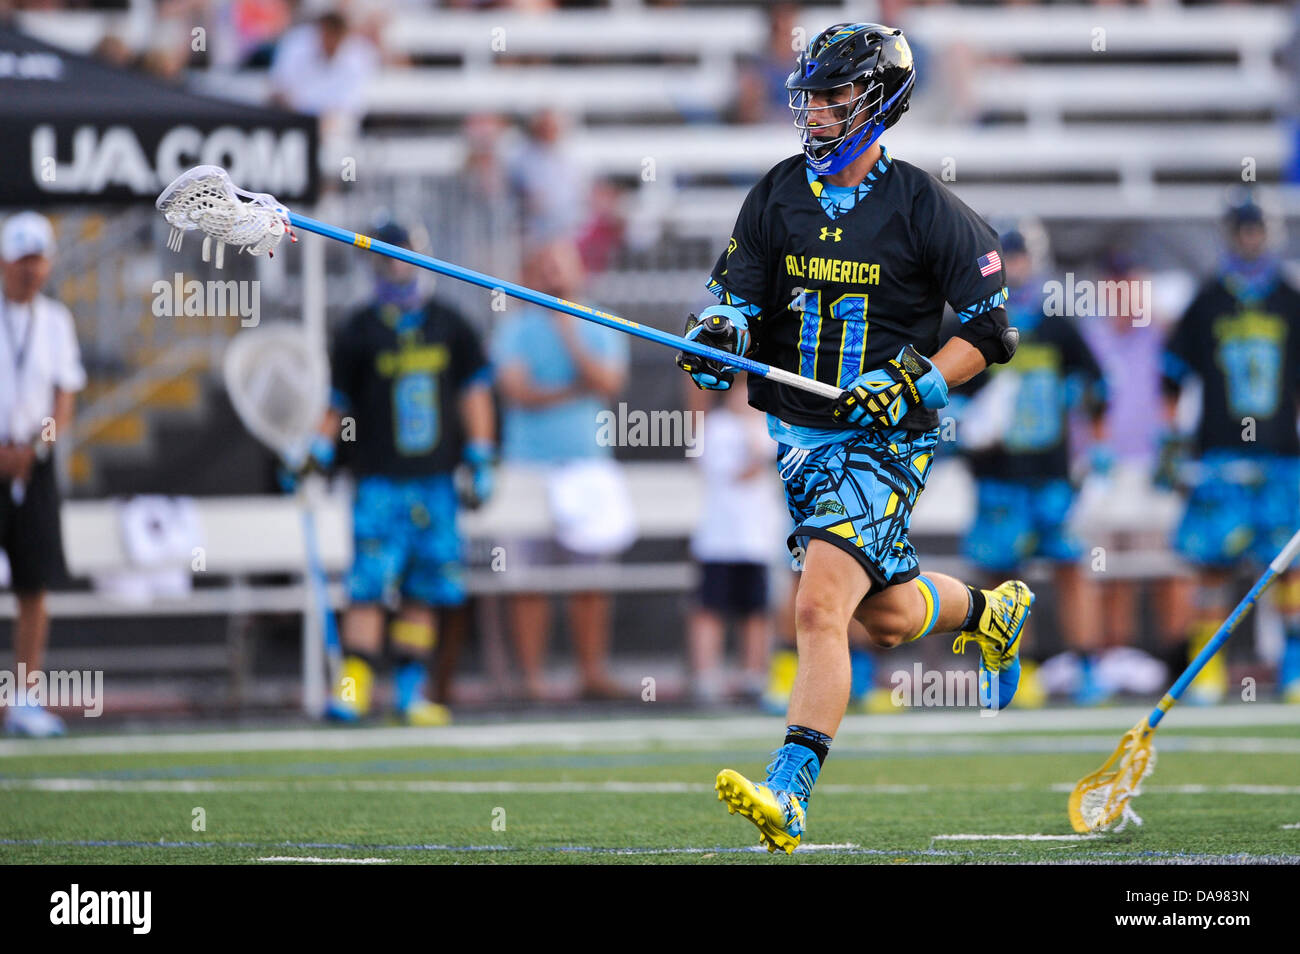 July 6, 2013 - Baltimore, MD, United States of America - July 6, 2013 Baltimore, MD.North All-Star Scott Firman #11 in action during the 8th during the 8th Annual Under Armour All-American Lacrosse Classic at Johnny Unitas Stadium Baltimore on July 6, 2013..South defeats North 28-24. Stock Photo